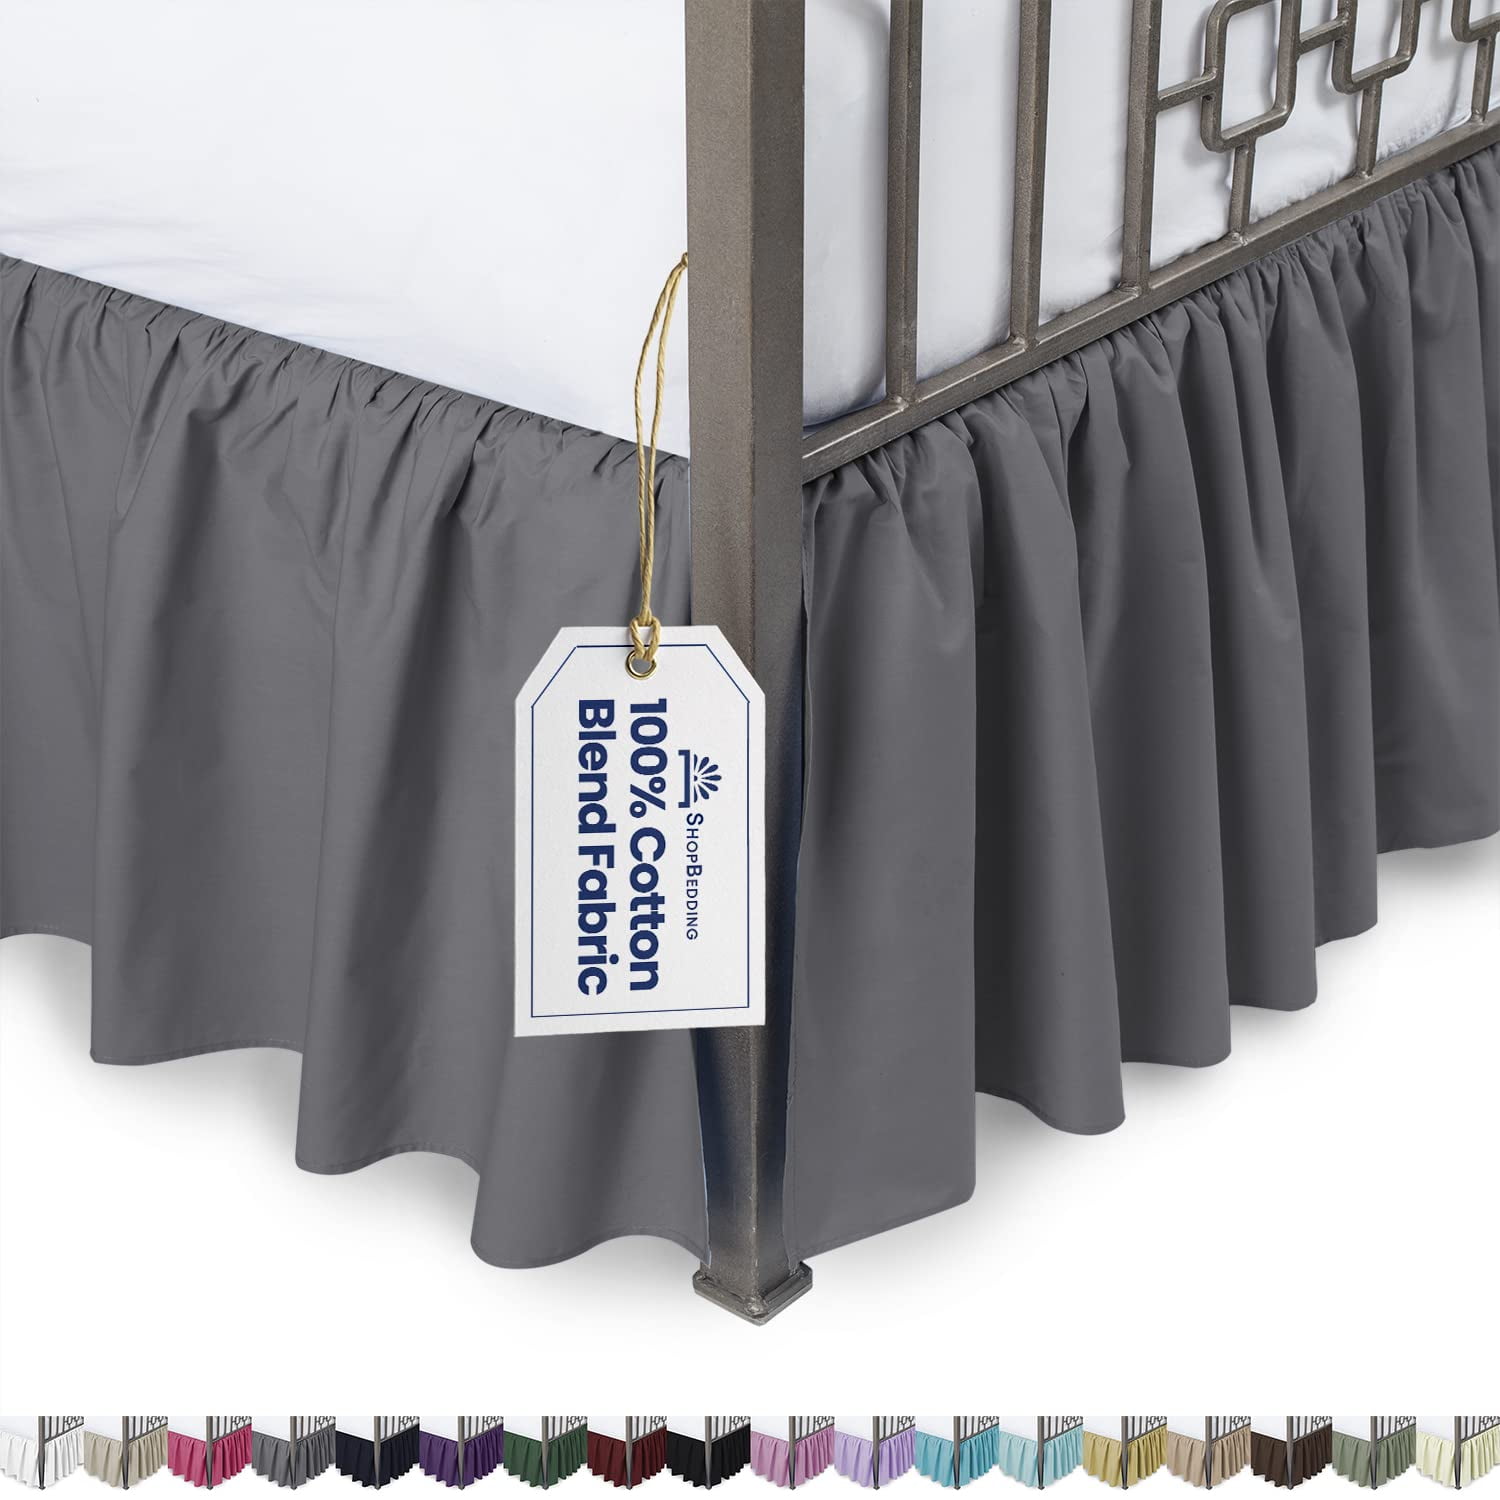 NEW 14" DROP SOLID EASY FIT SET UP AROUND ALL CORNERS 1 PC BED SKIRT IN FULL 